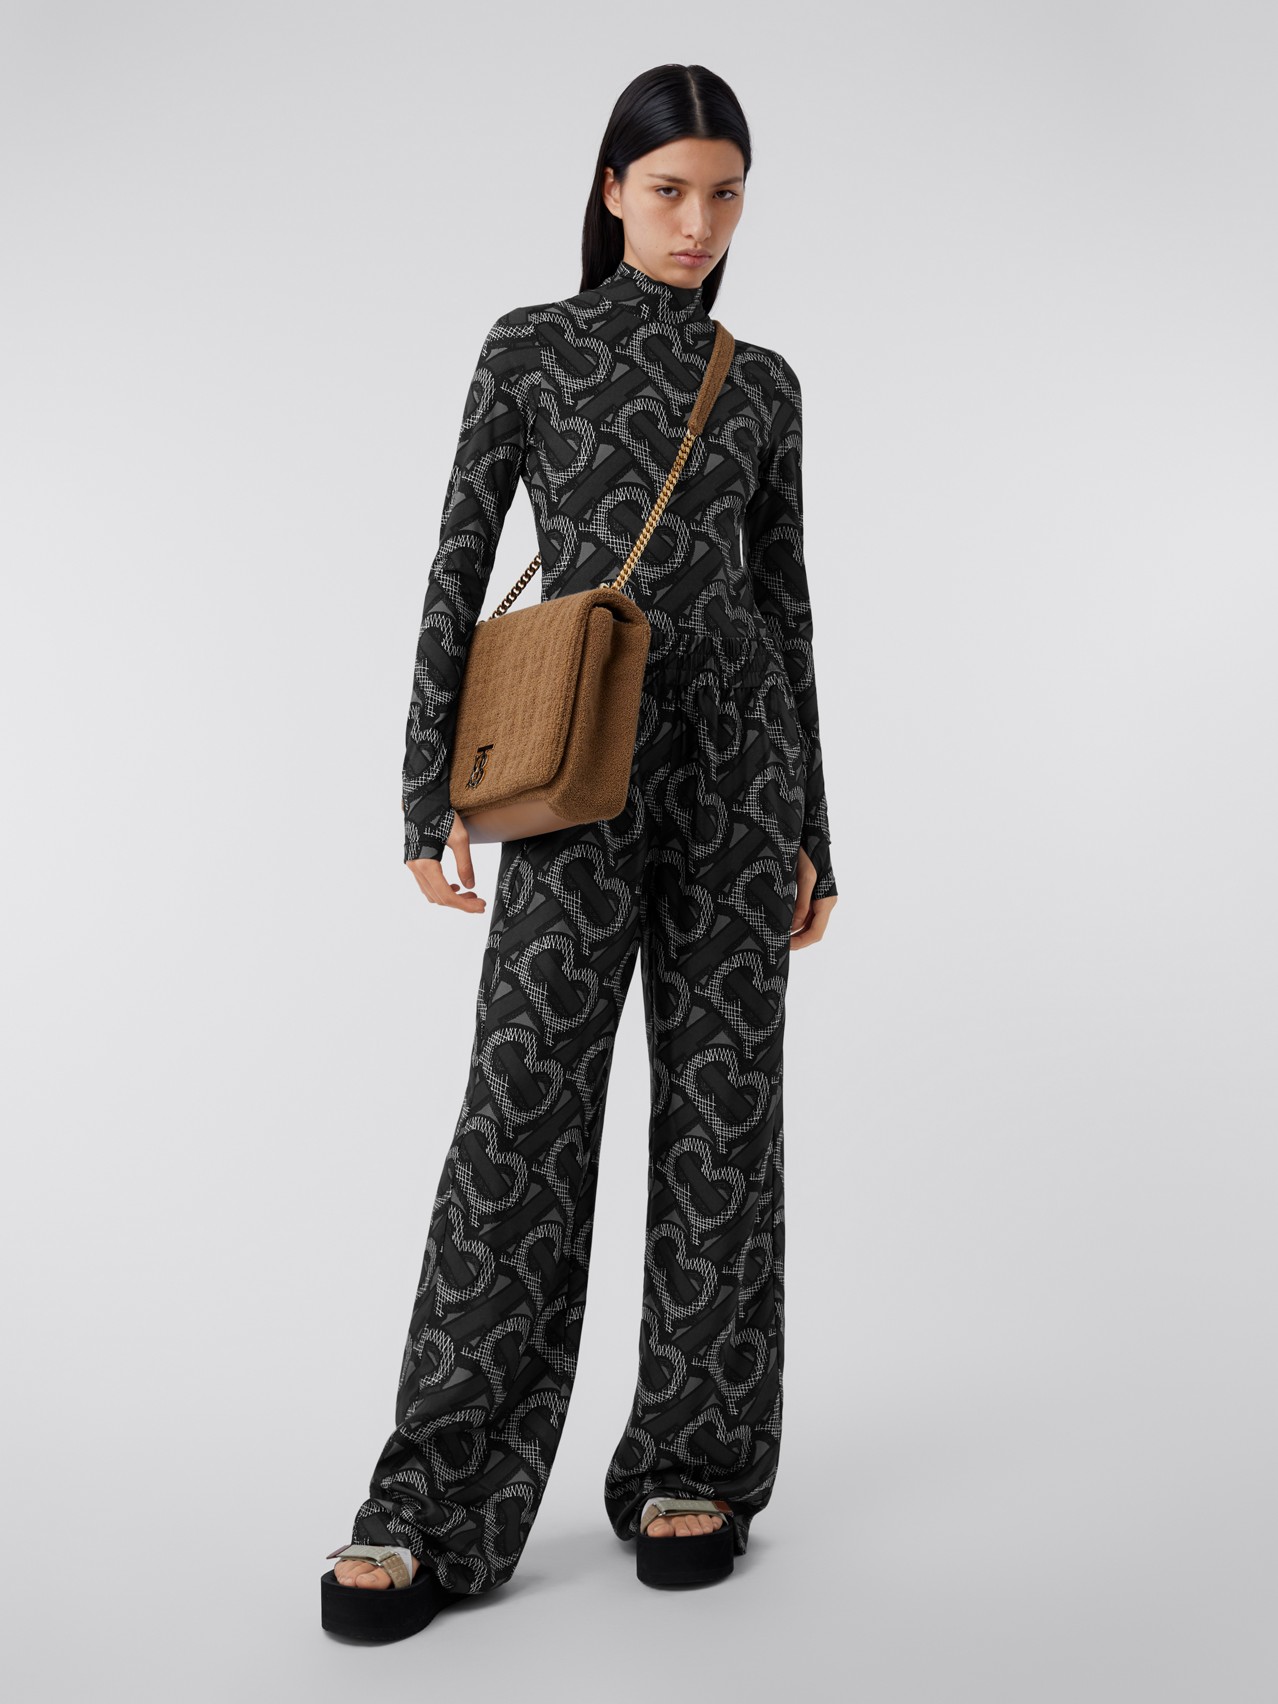 Monogram Print Stretch Nylon Turtleneck Bodysuit by Burberry, available on burberry.com for $490 Kendall Jenner Top SIMILAR PRODUCT